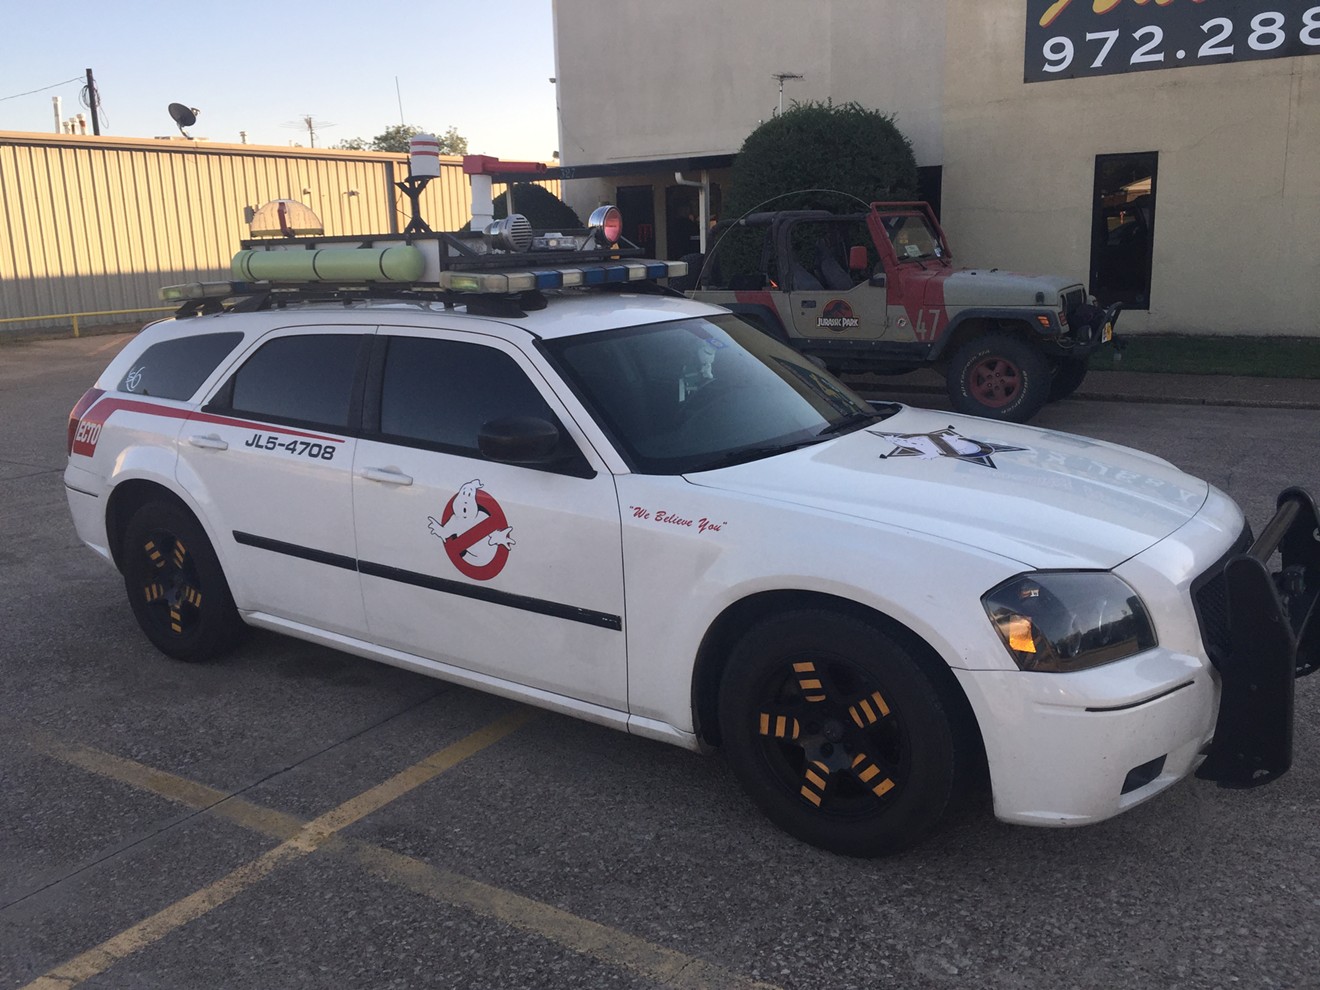 This 2007 Dodge Magnum has been the official car of the Dallas-Fort Worth Ghostbusters cosplay franchise for the last three years. Franchise leader and car builder Derrick Dorman is putting it up for sale.